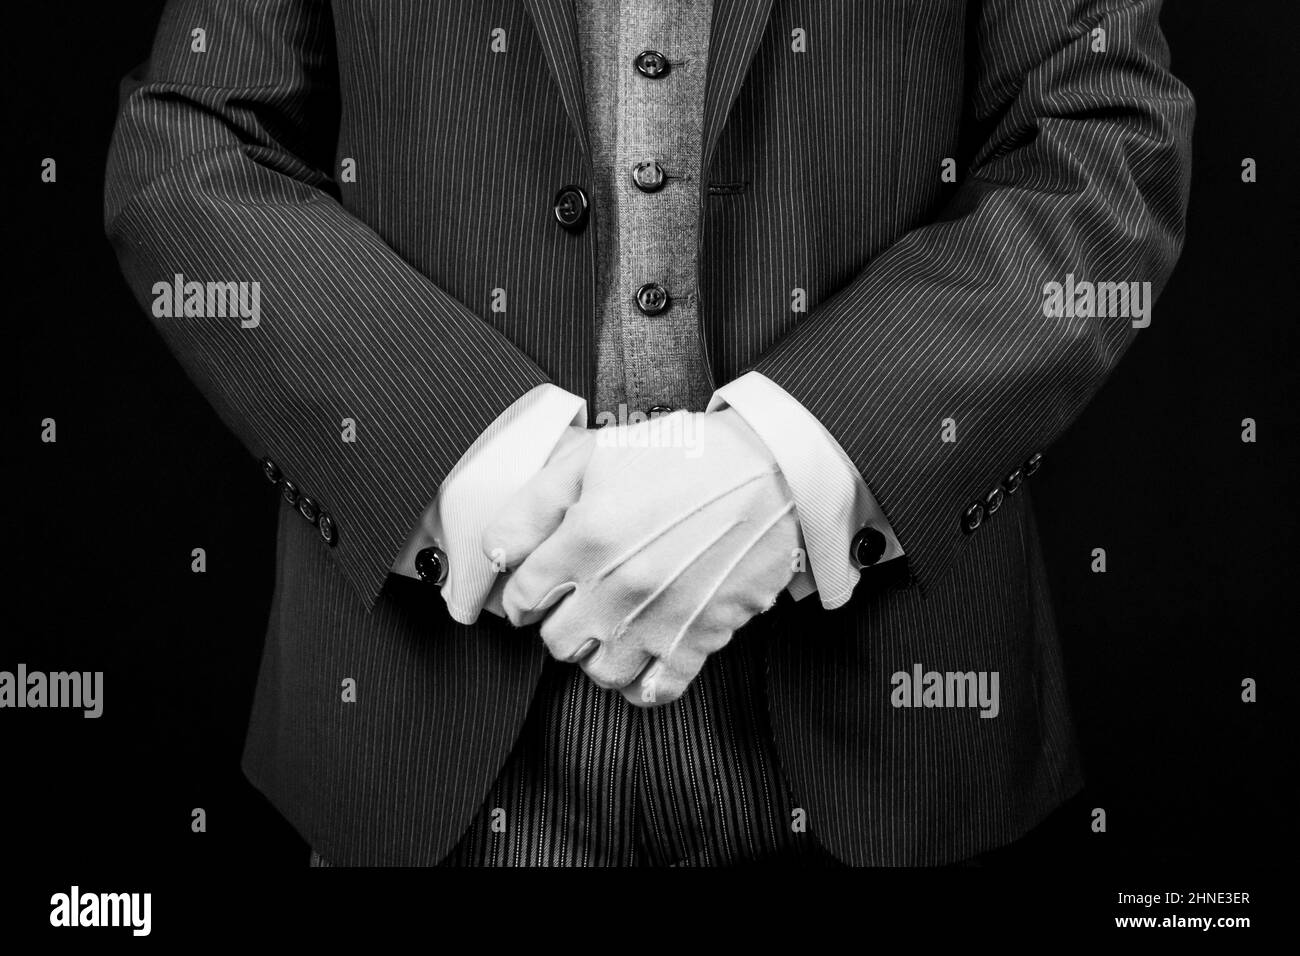 Butler in Dark Suit and White Gloves Standing at Respectful Attention. Concept of Service Industry and Professional Hospitality. Stock Photo